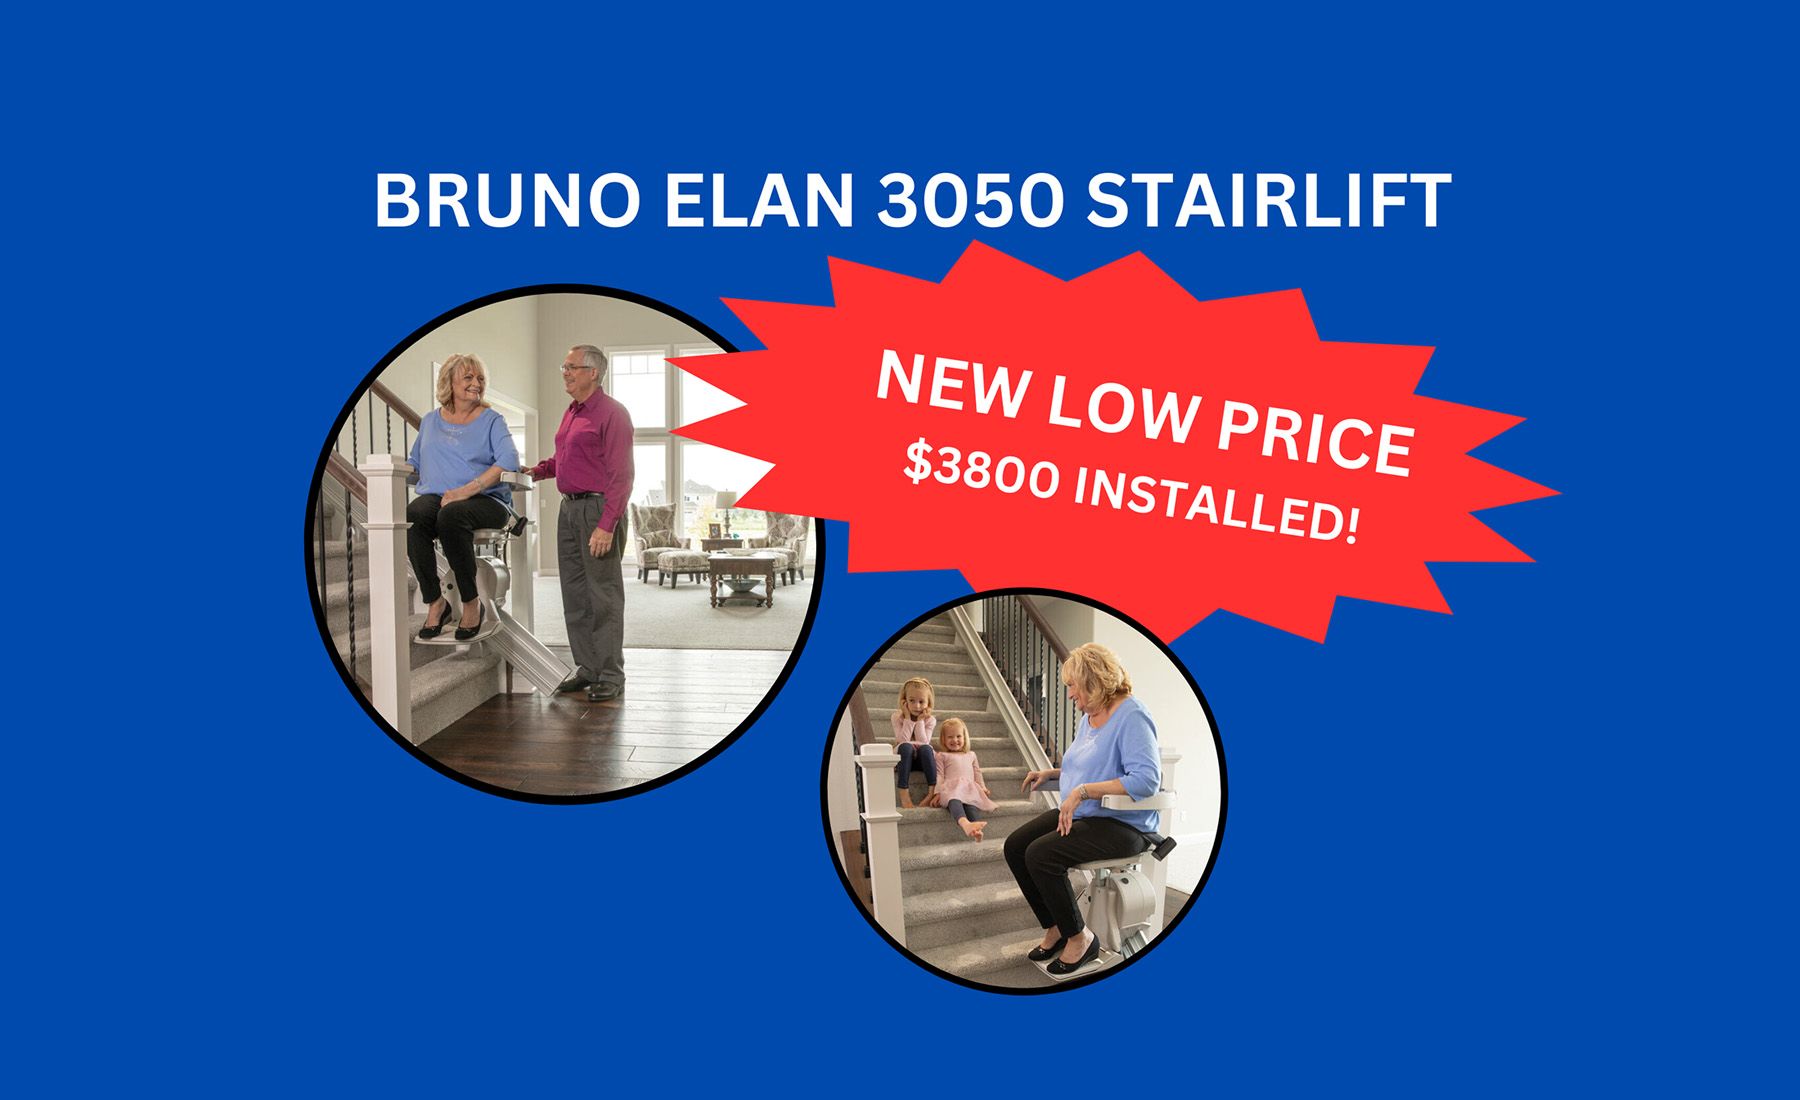 An advertisement for a Bruno Elan 3050 Stairlift